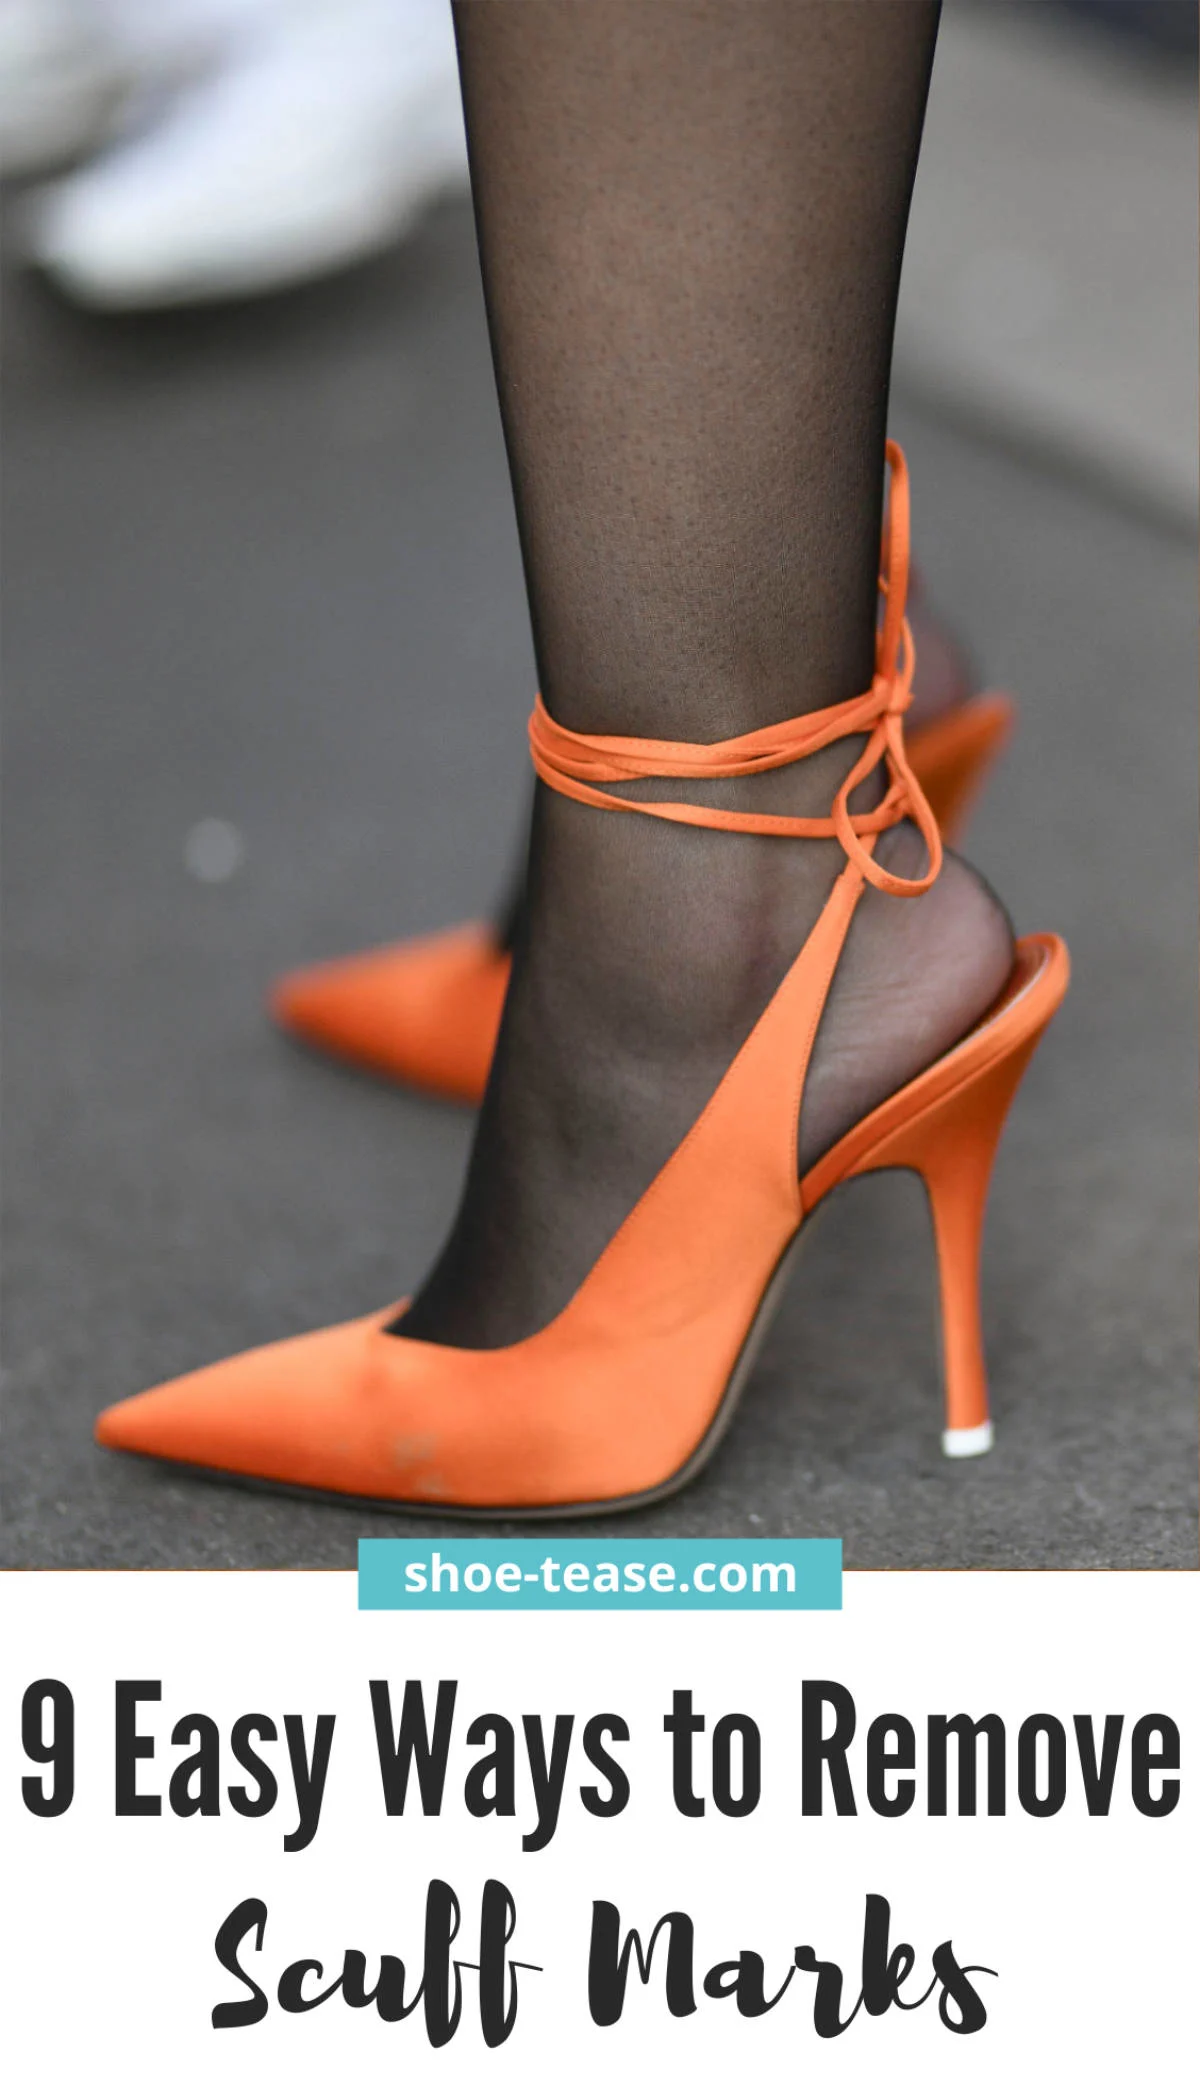 Close up of woman in orange shoes with text below reading shoe-tease.com 9 easy ways to remove scuff marks from shoes.